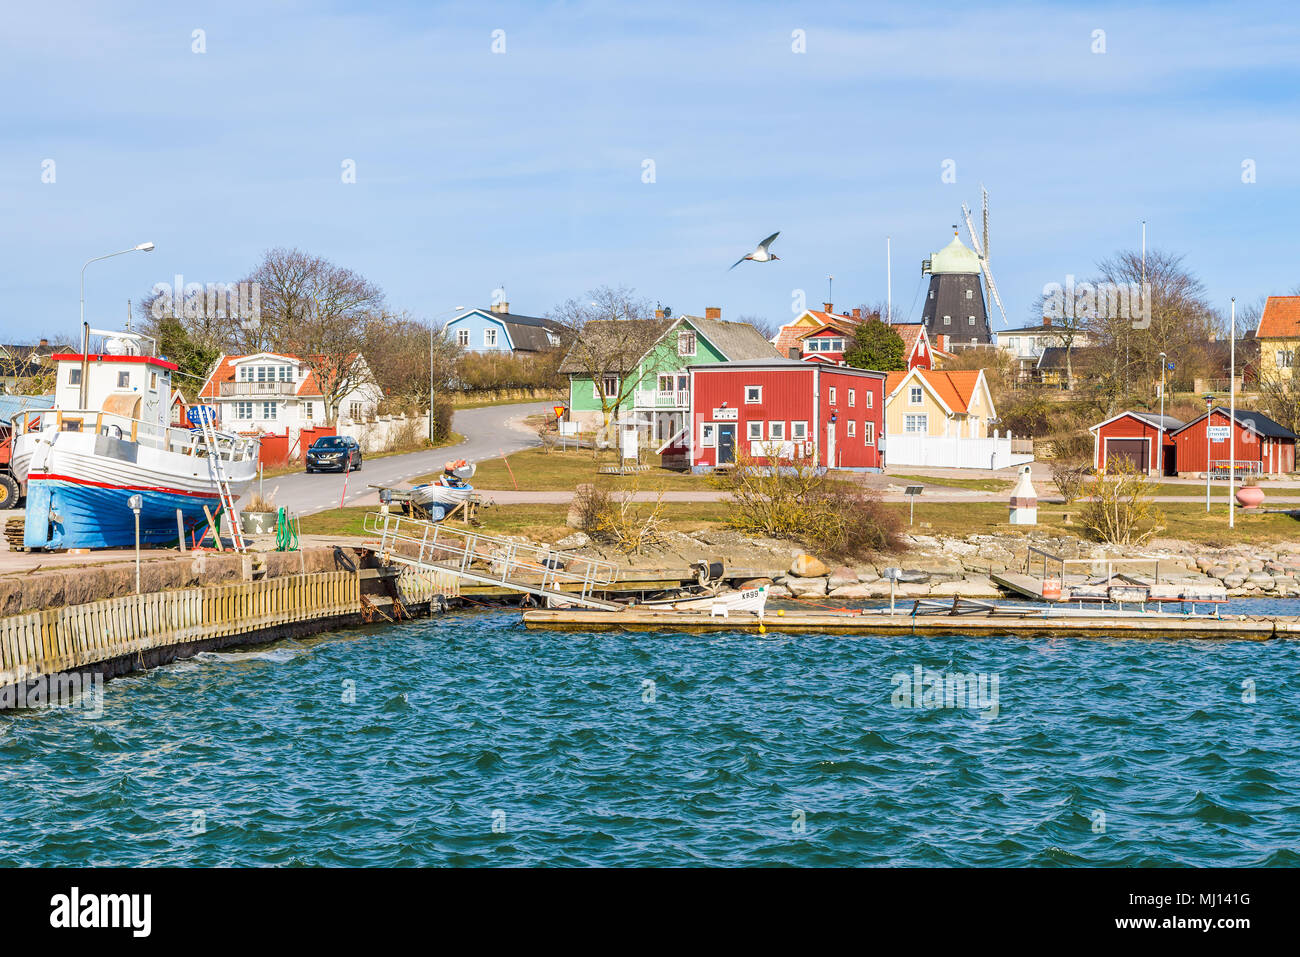 Sandvik, Oland, Sweden - April 7, 2018: Travel documentary of everyday life and environment. The small village harbor with fishing boats on the pier.  Stock Photo